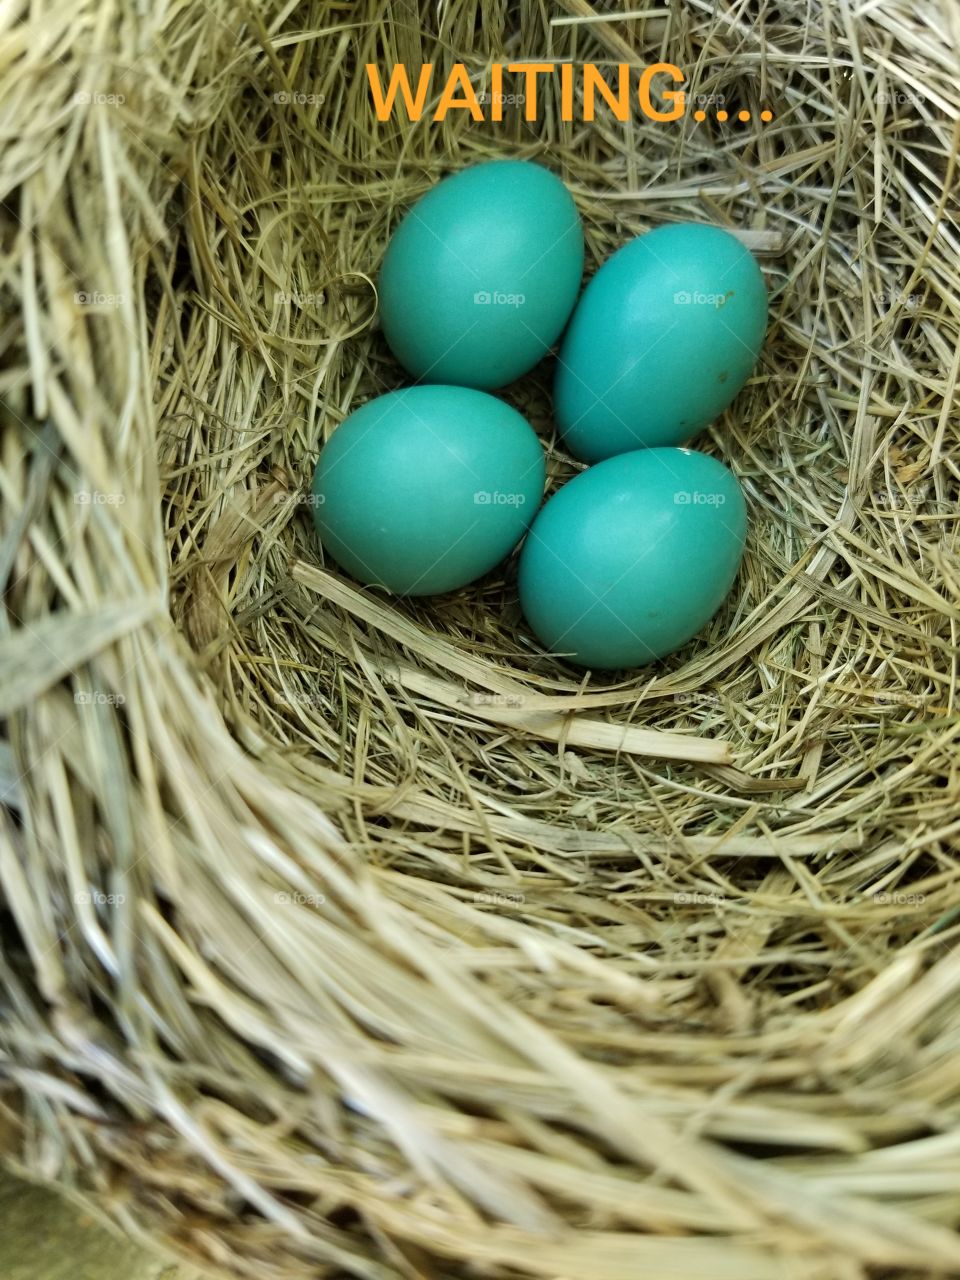 Beautiful blue baby Robin eggs. I monitored them until they hatched.